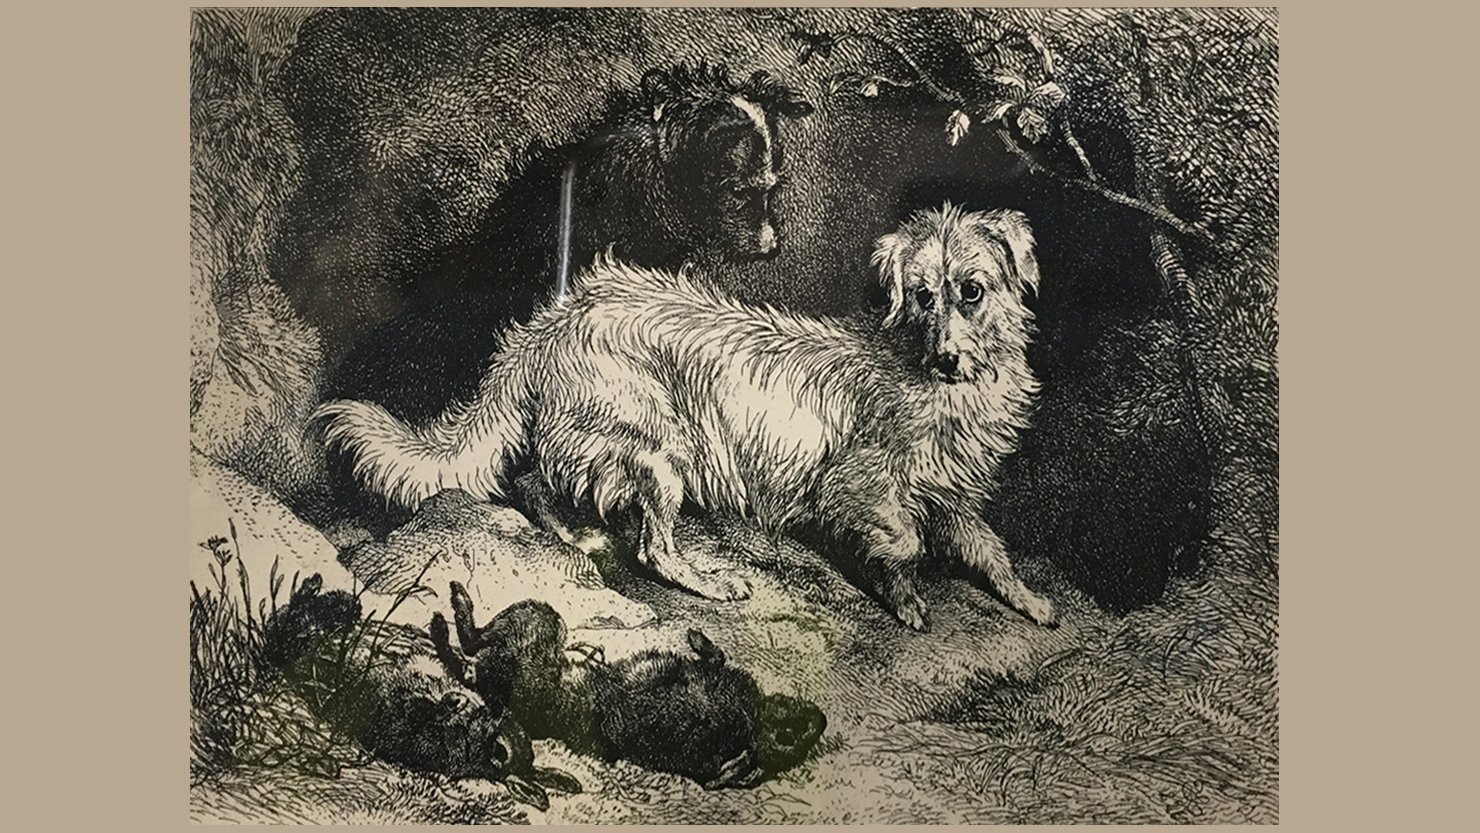 Black and white print of dogs from The Box's collection of works on paper